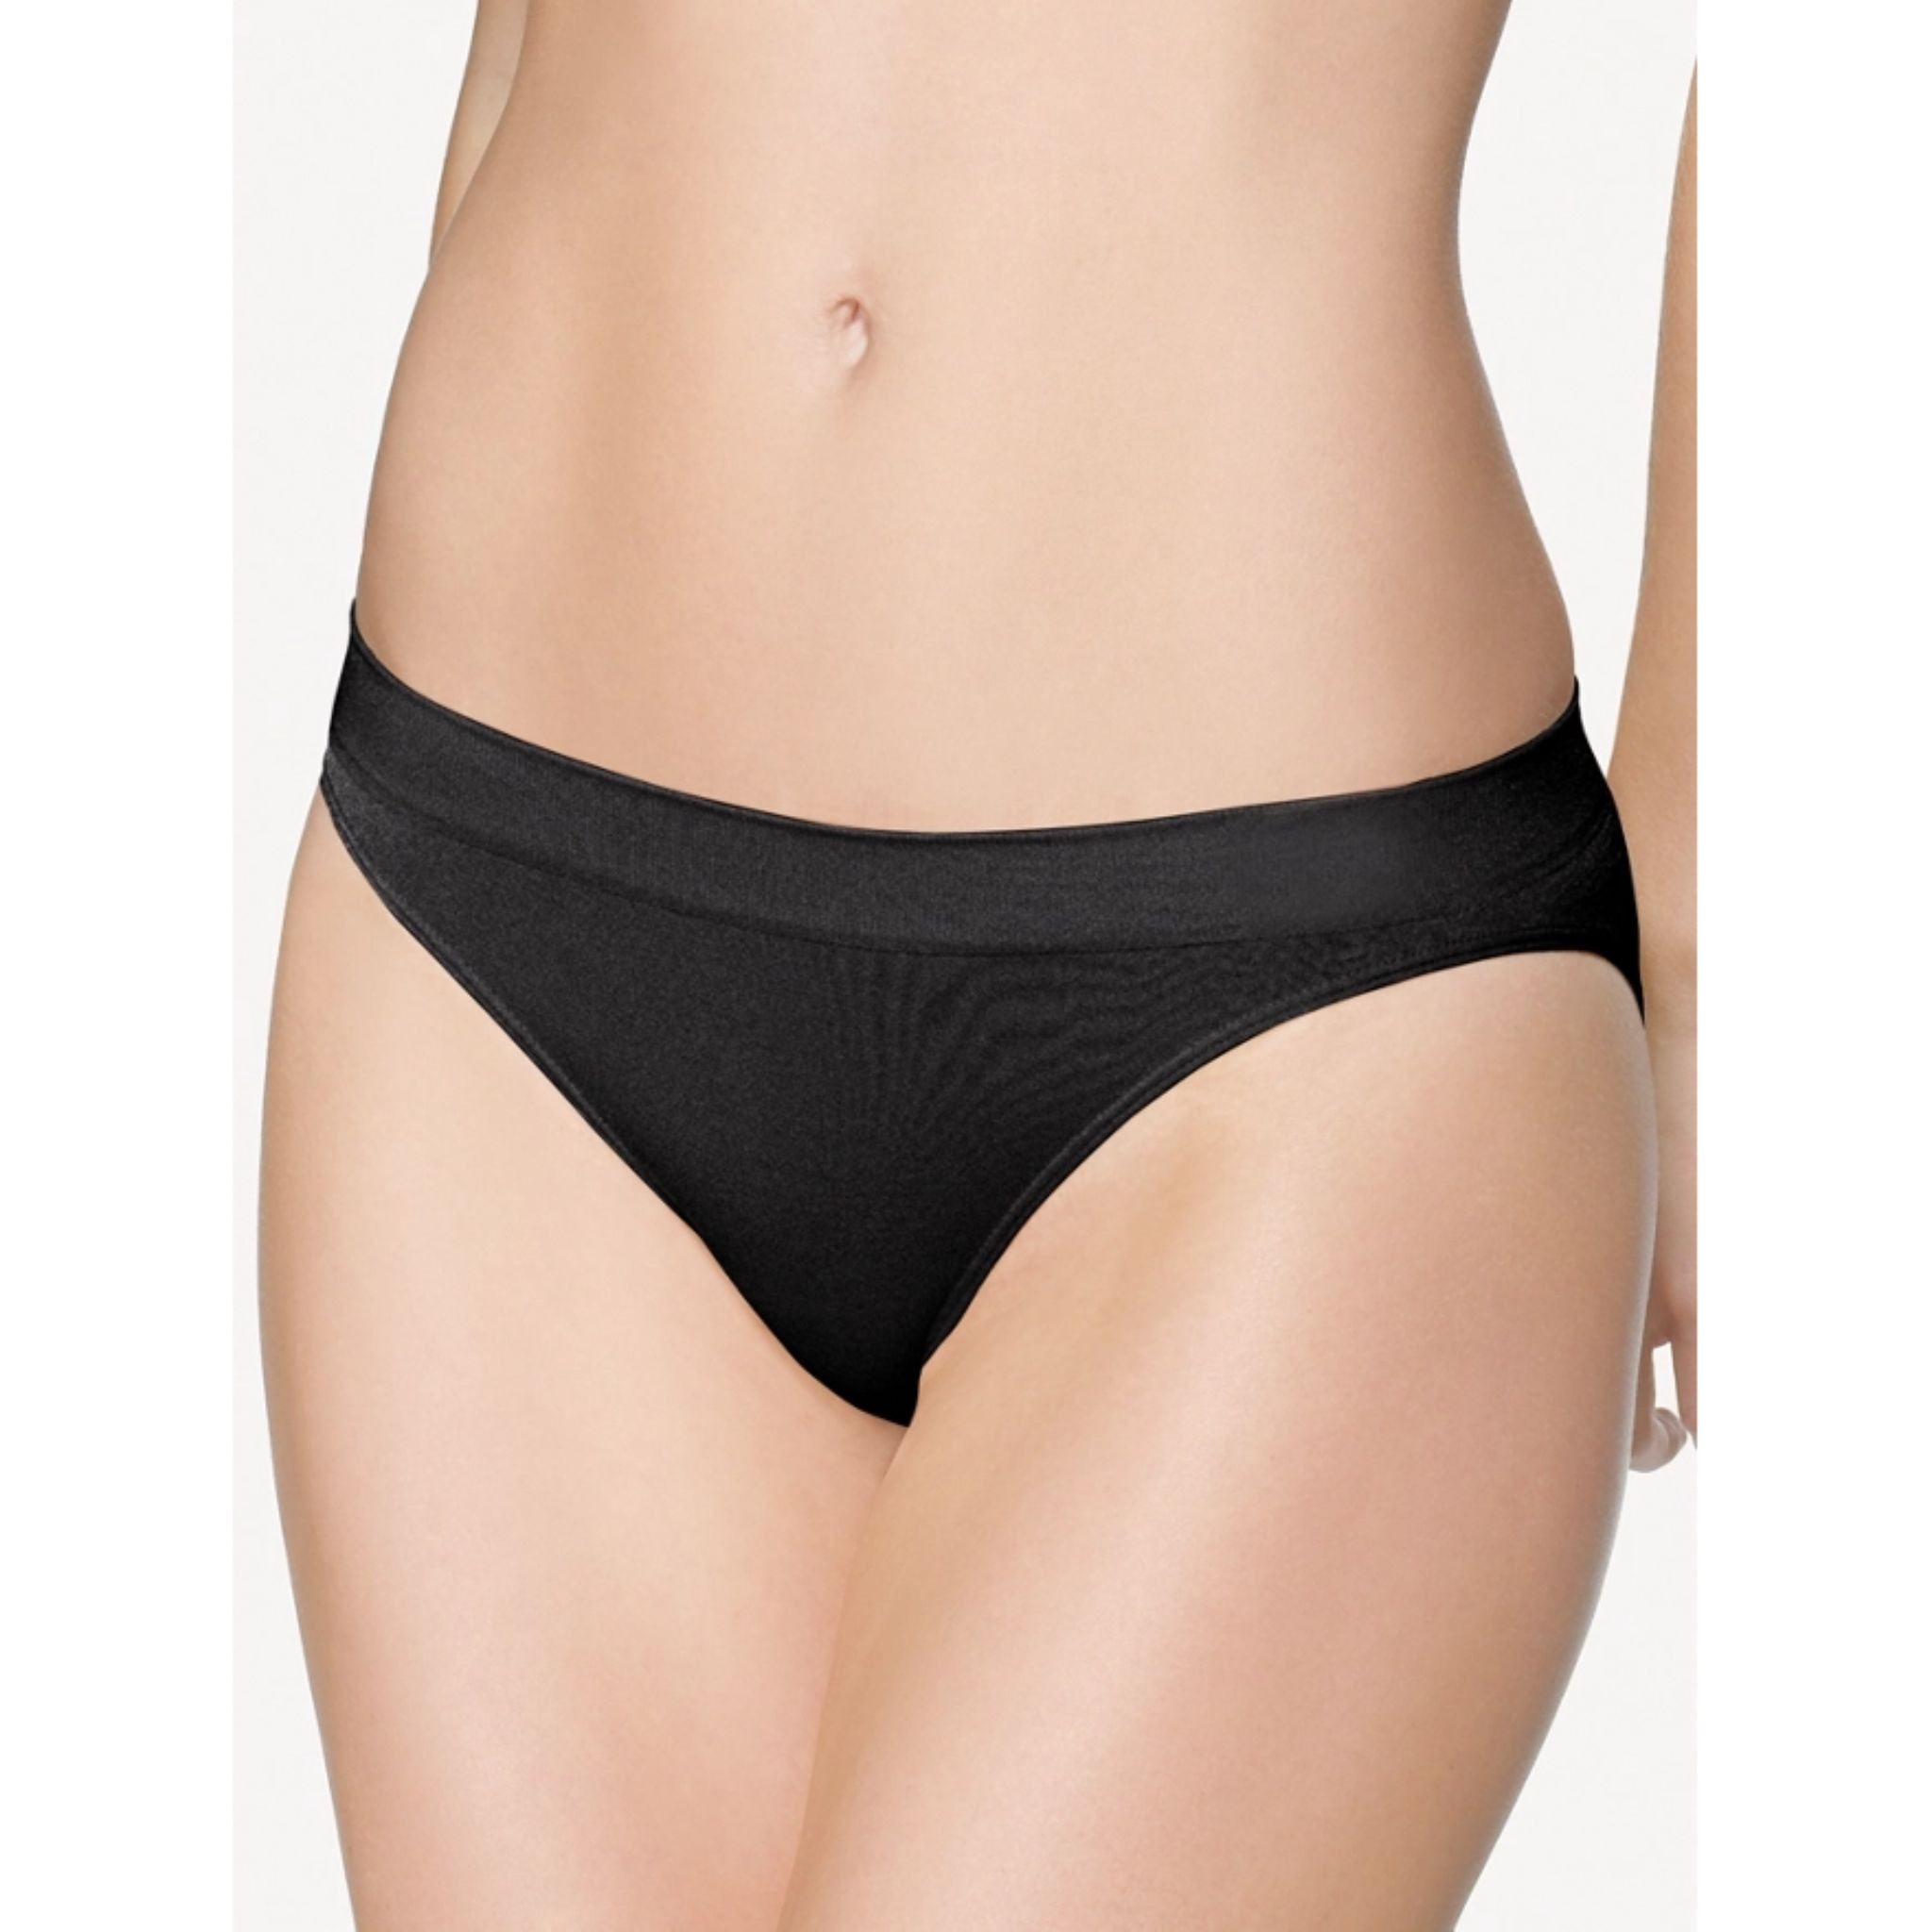 The B-Smooth® Seamless Bikini is the perfect choice under any bottom in your wardrobe.  Seamless bikini styling Very soft and smooth nylon/Lycra fabric Clothes glide easily over bikini No visible panty lines Our bikini sits at your hips  Fabric content: Body: 93% Nylon/7% Spandex; Crotch Lining: 70% Nylon/25% Cotton/5% Spandex